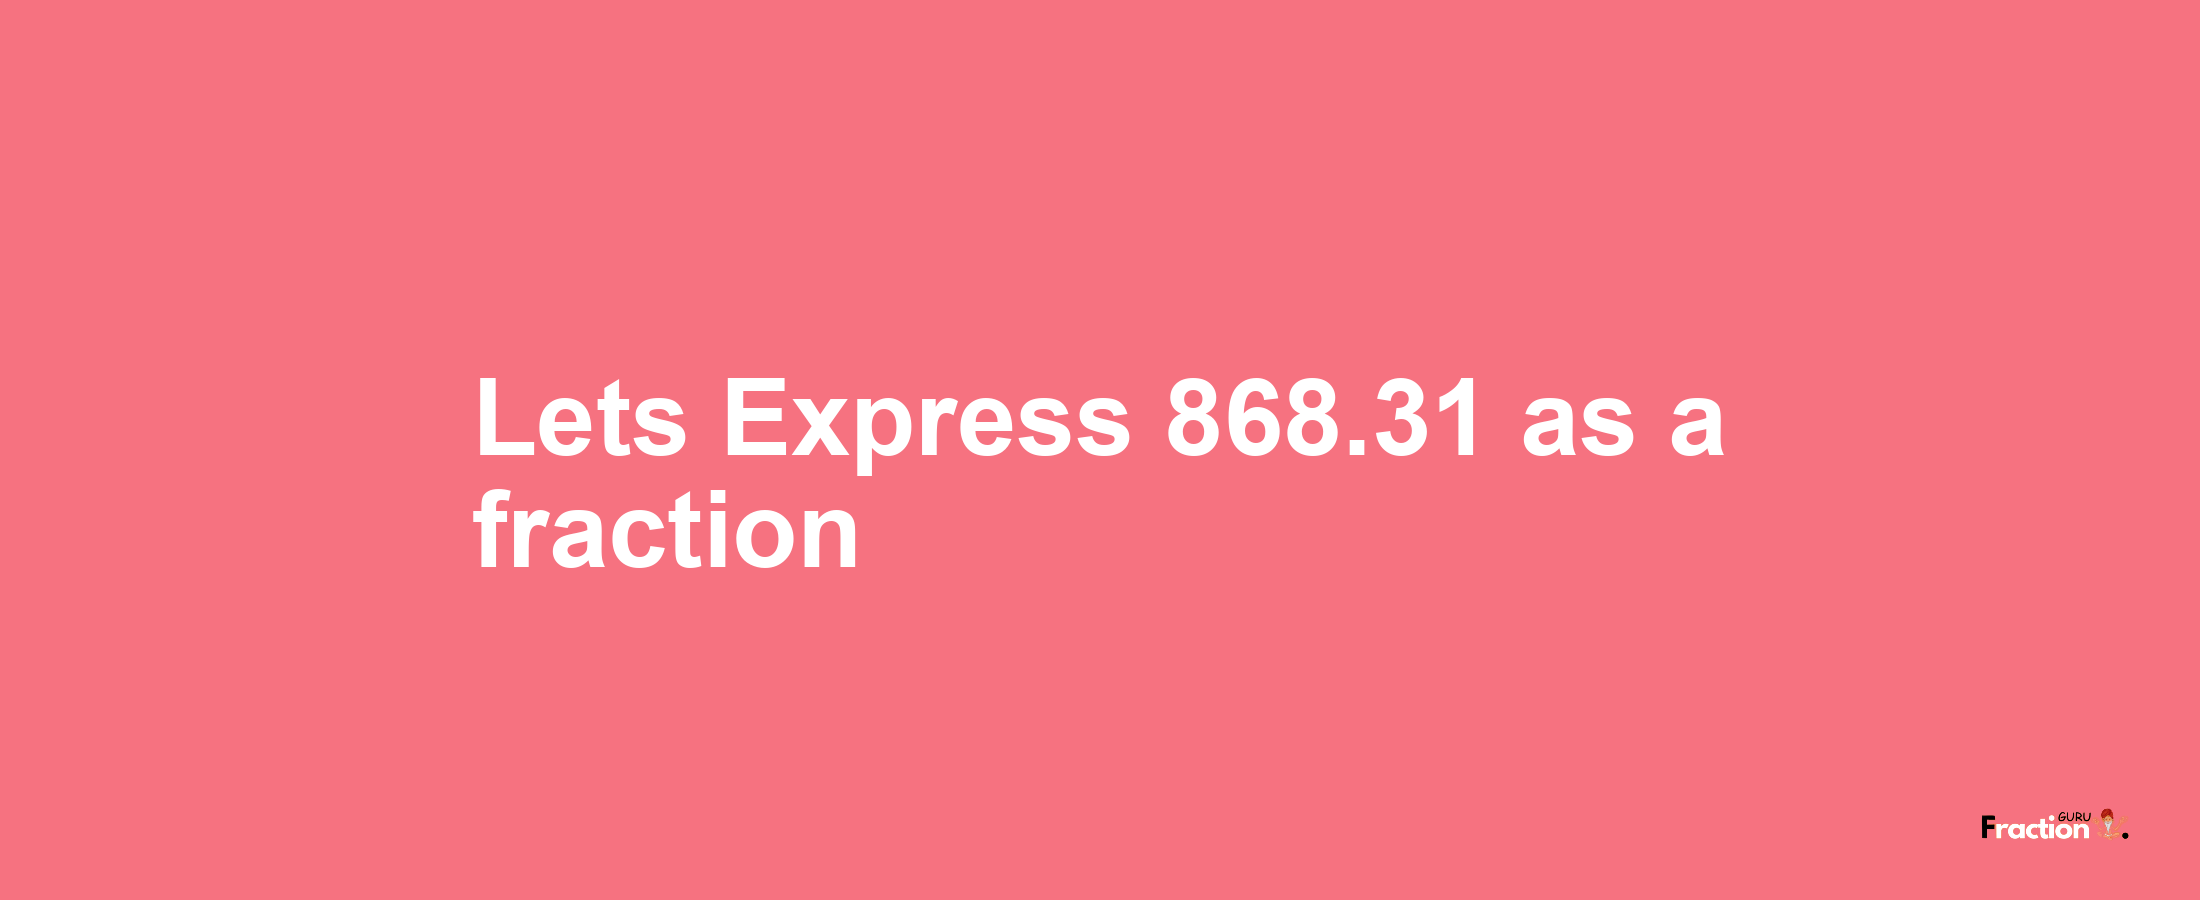 Lets Express 868.31 as afraction